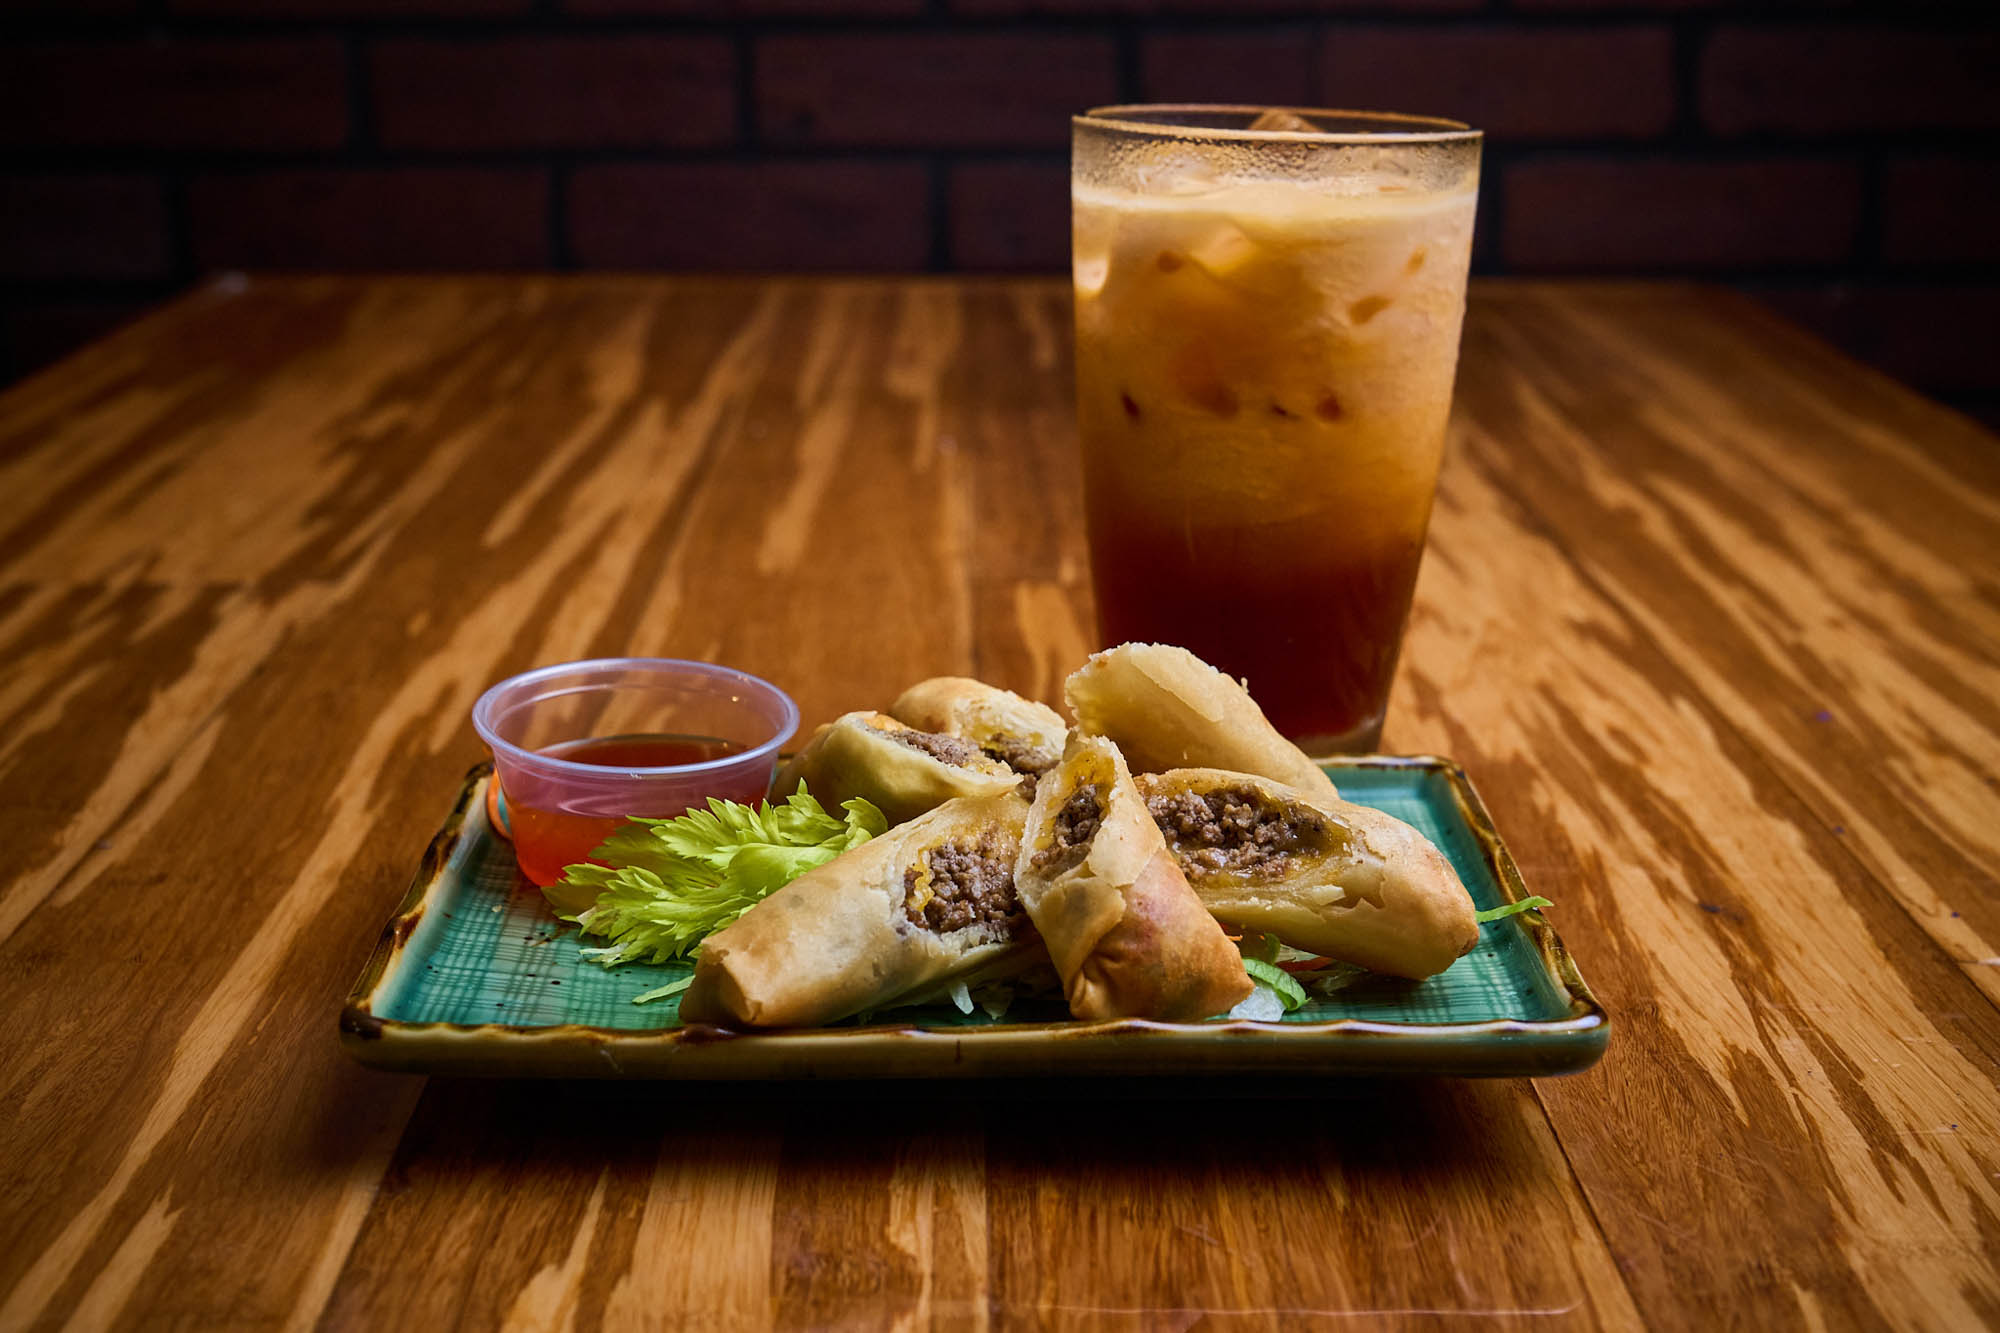 Egg roll plate and a glass of Thai ice tea